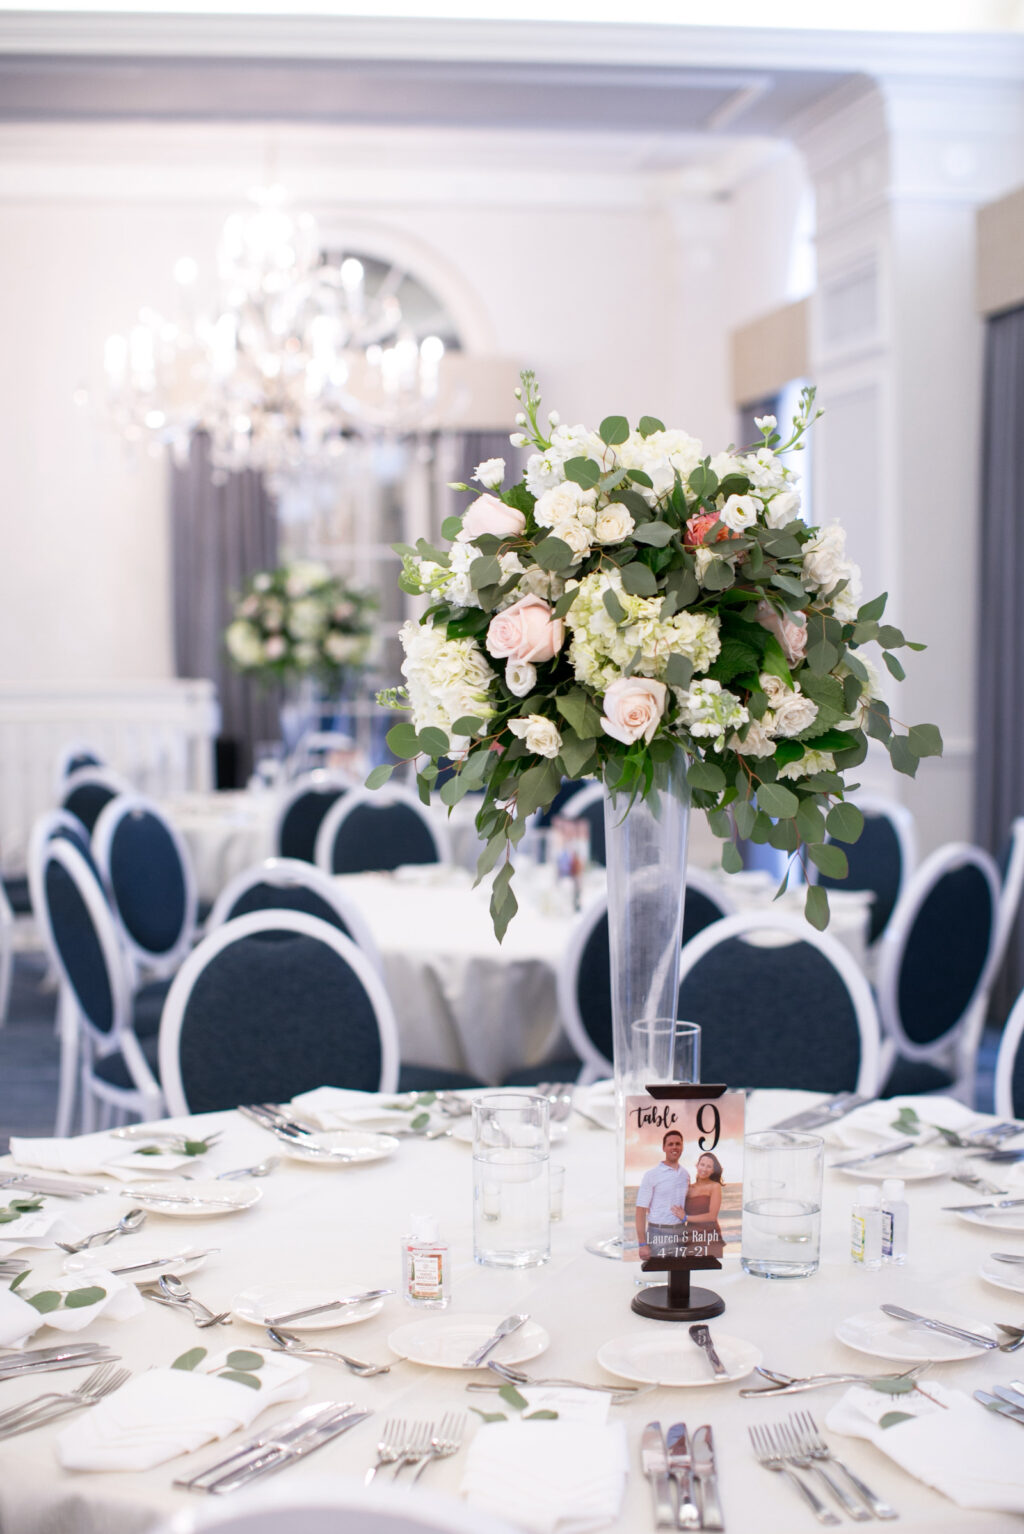 Elegant Wedding Reception Tablescapes with Navy and Silver Chairs and White Linens | Tall Floral Centerpieces in a Clear Vase